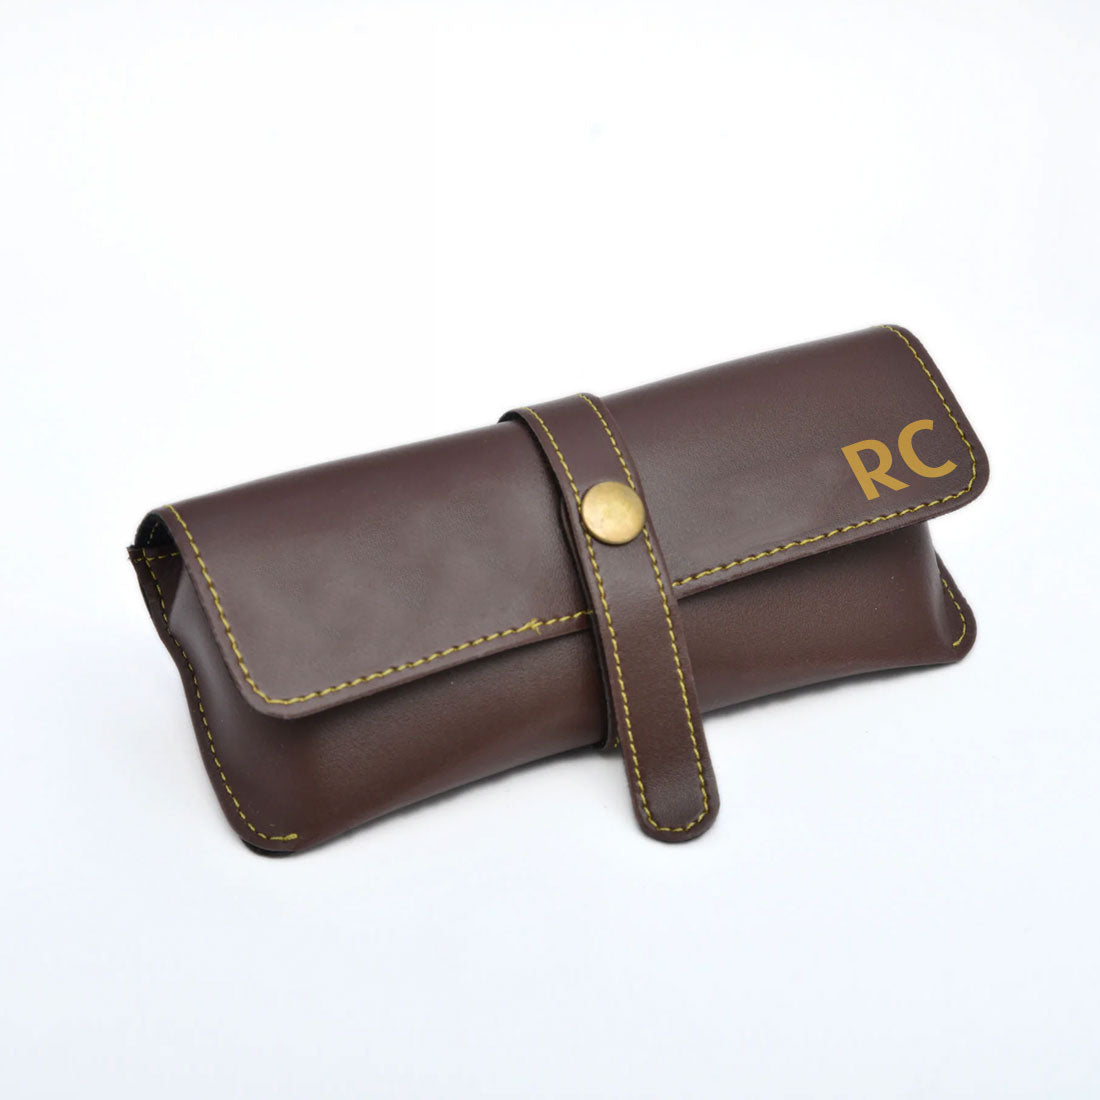 Personalised Sunglasses Case Cover for Spectacle Frame & Sunglass - Premium Vegan Leather